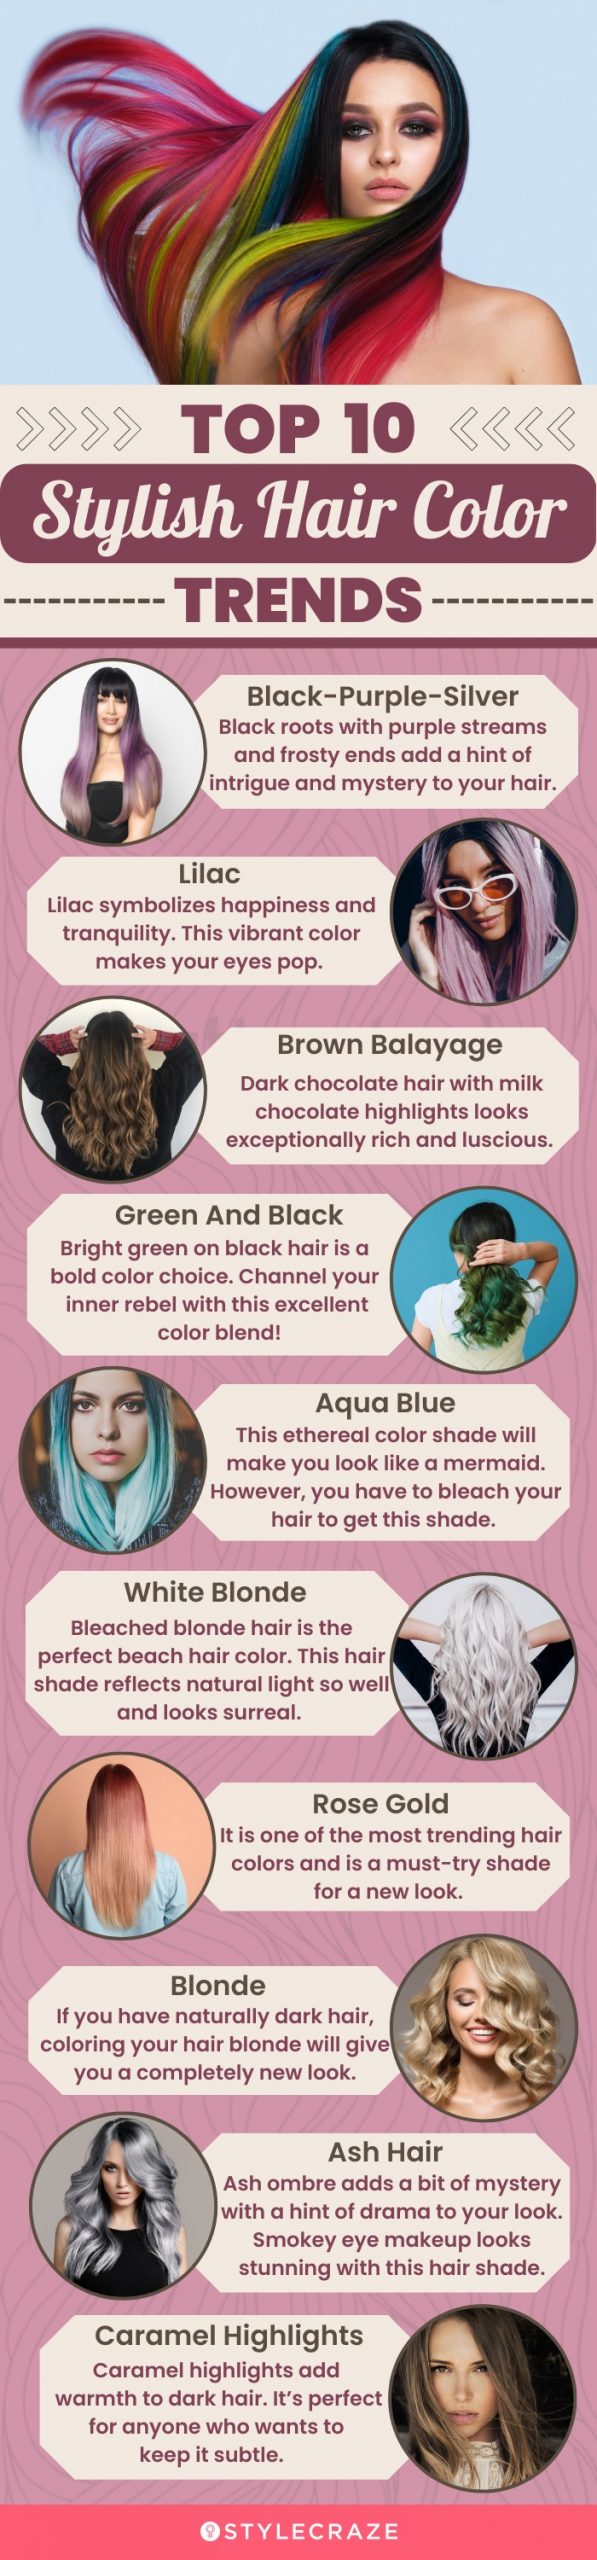 top 10 stylish hair color trends (infographic)